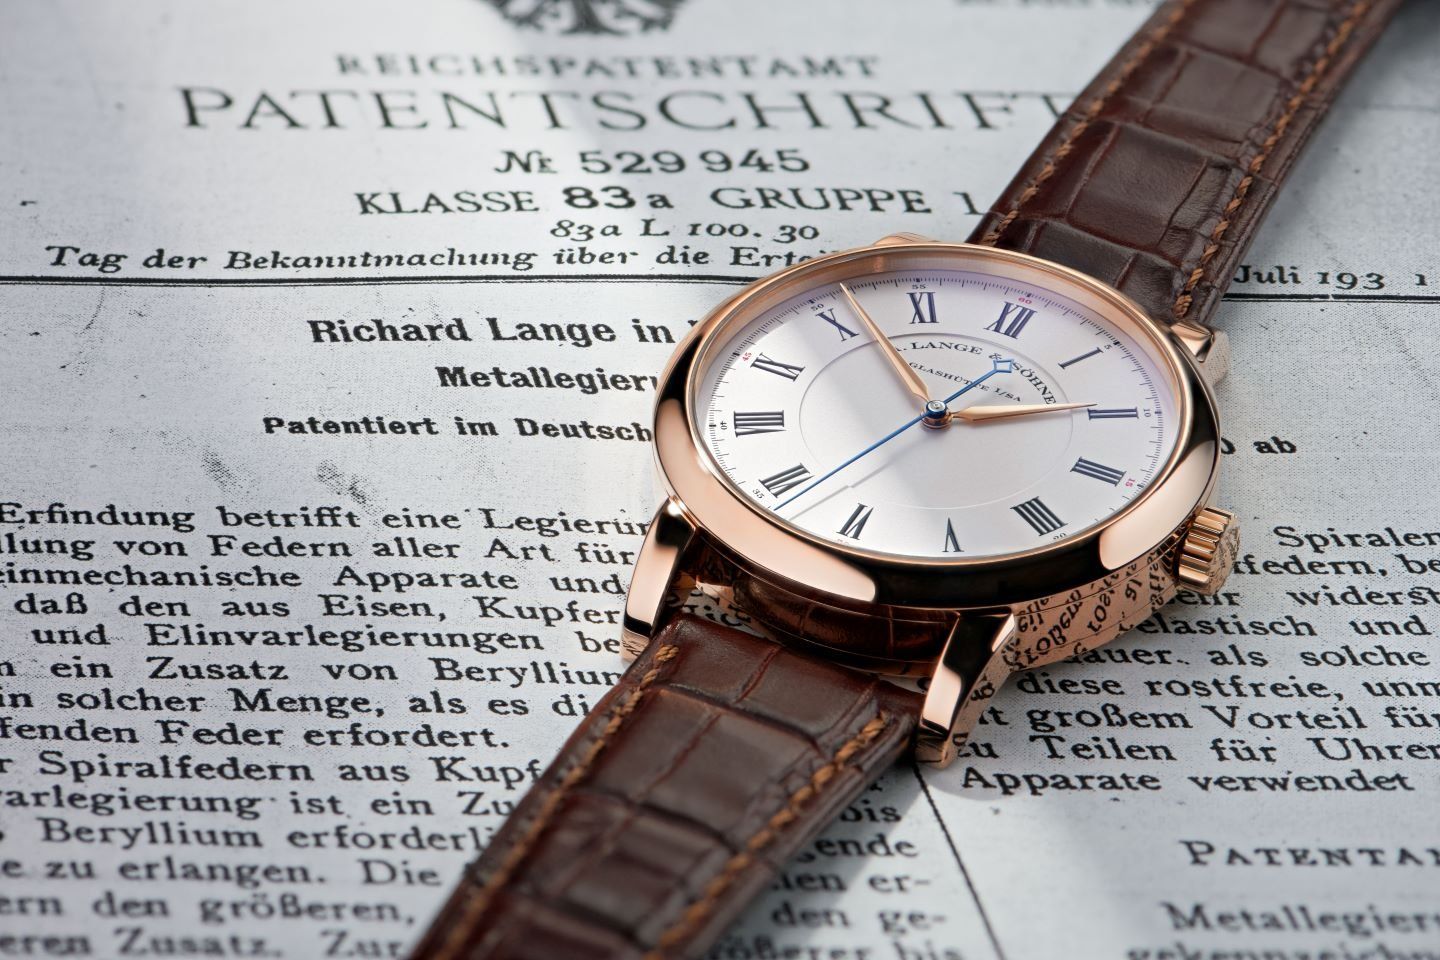 Richard Lange in pink gold in front of the patent application of his eponym